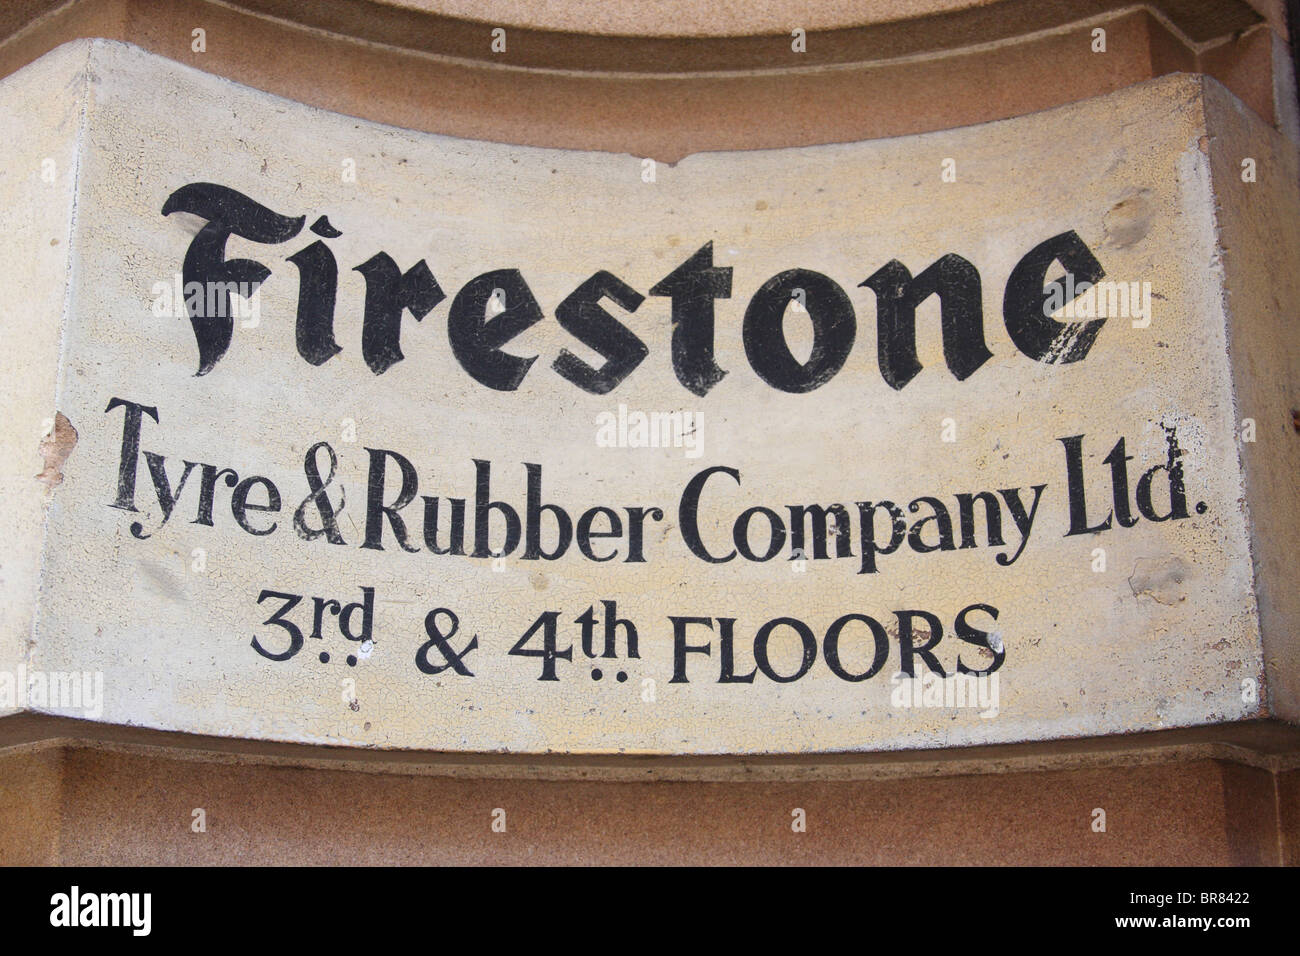 A Firestone Tyre & Rubber Company sign on a building in a U.K. city. Stock Photo